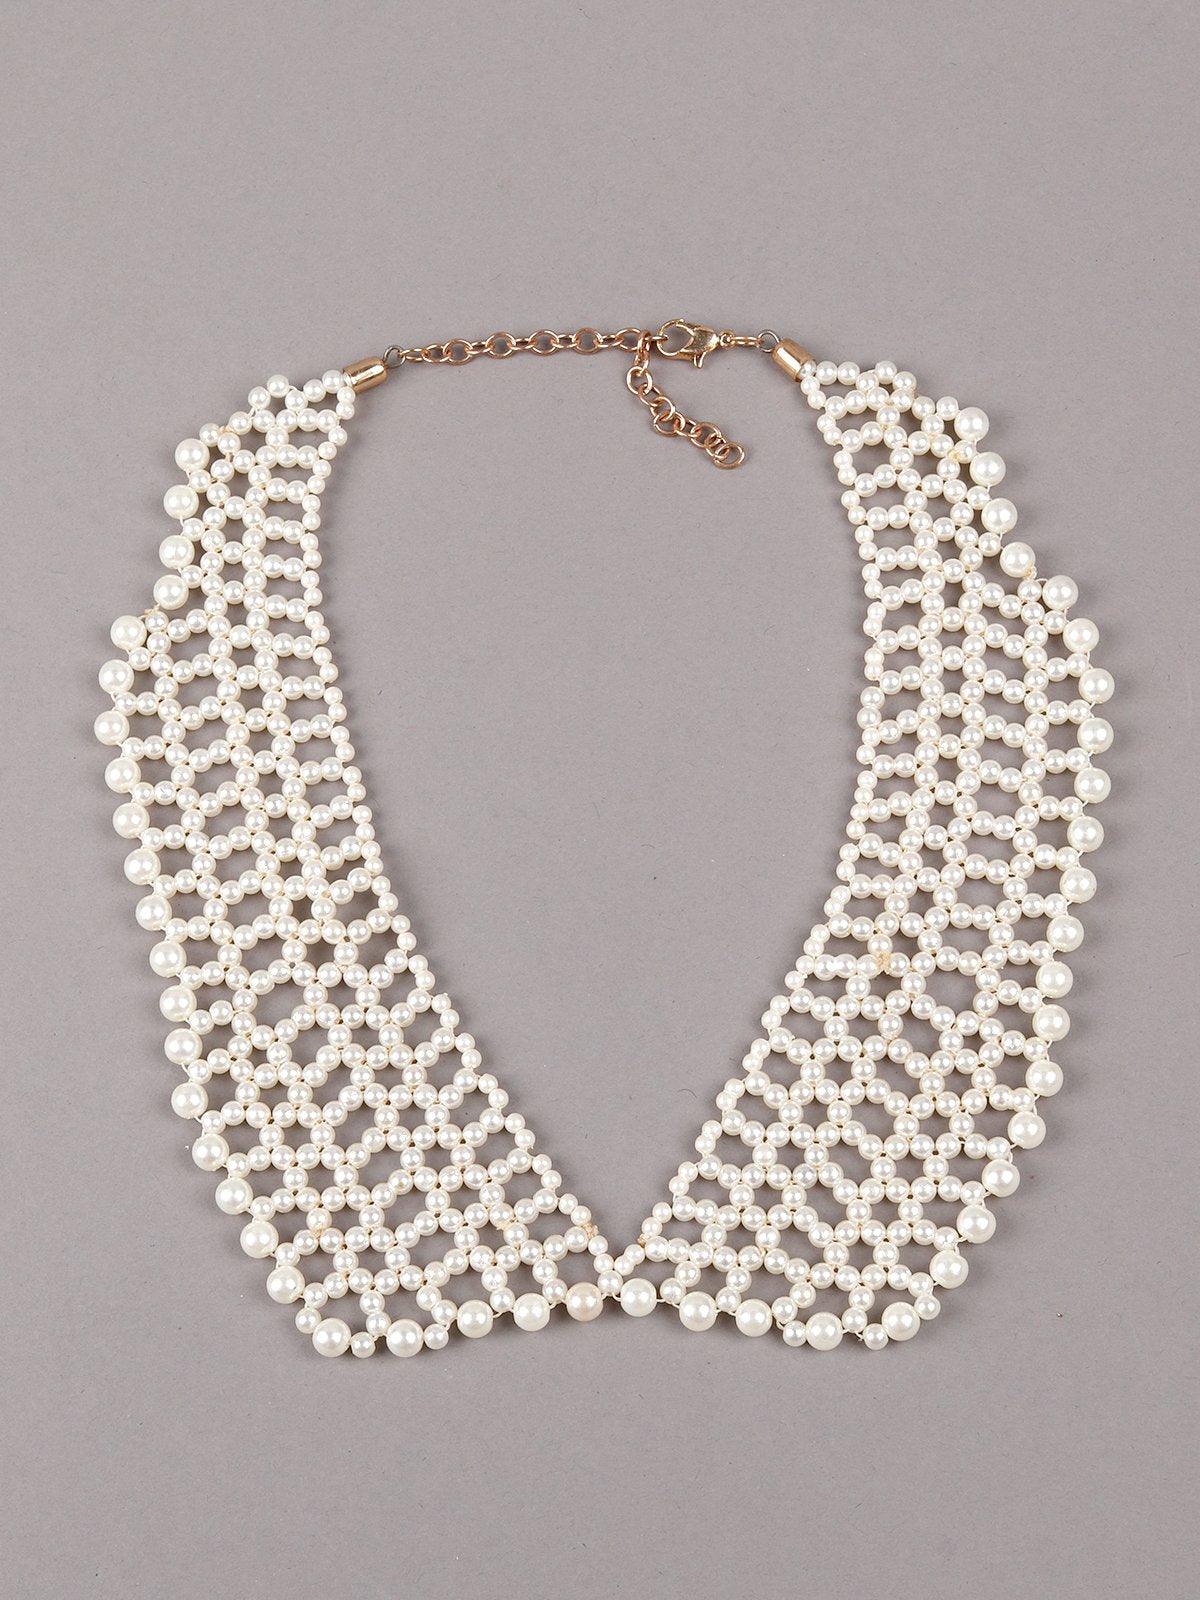 Women's White Beaded Layered Necklace With Pearls - Odette